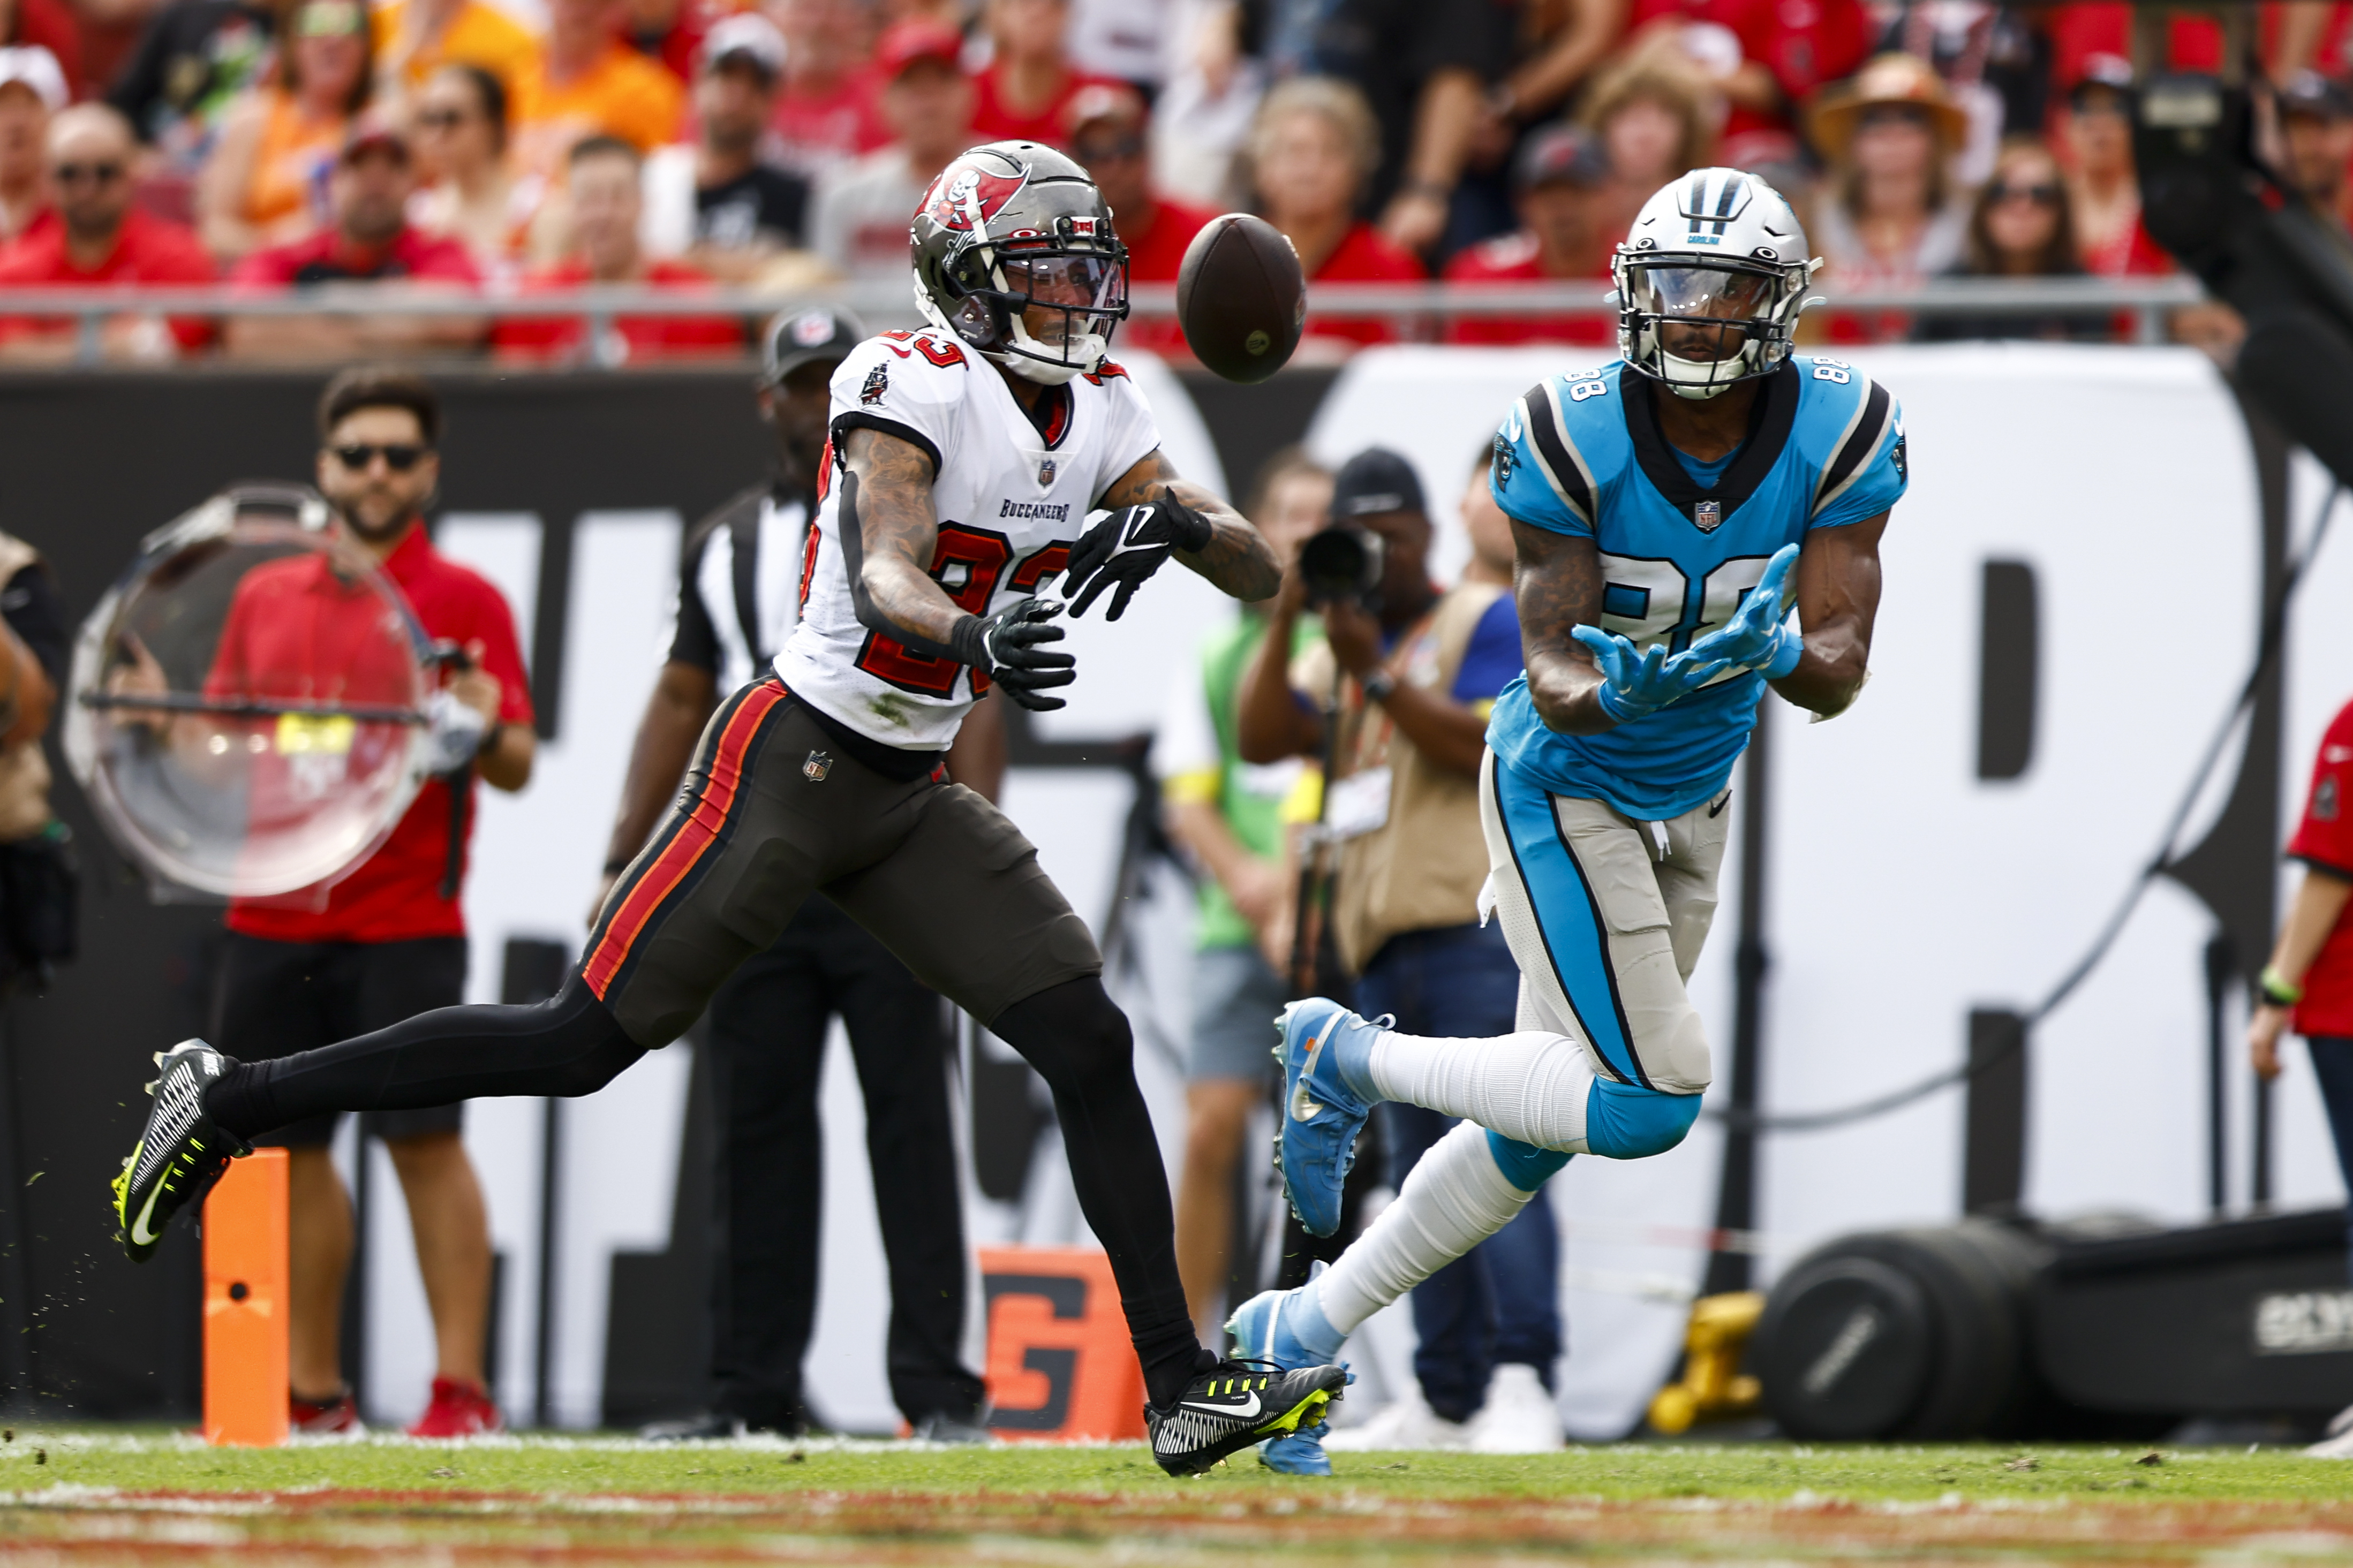 Cornerback Sean Murphy-Bunting (L) of the Tampa Bay Buccaneers breaks a pass in the game against the Carolina Panthers at Raymond James Stadium in Tampa, Florida, January 1, 2023. CFP